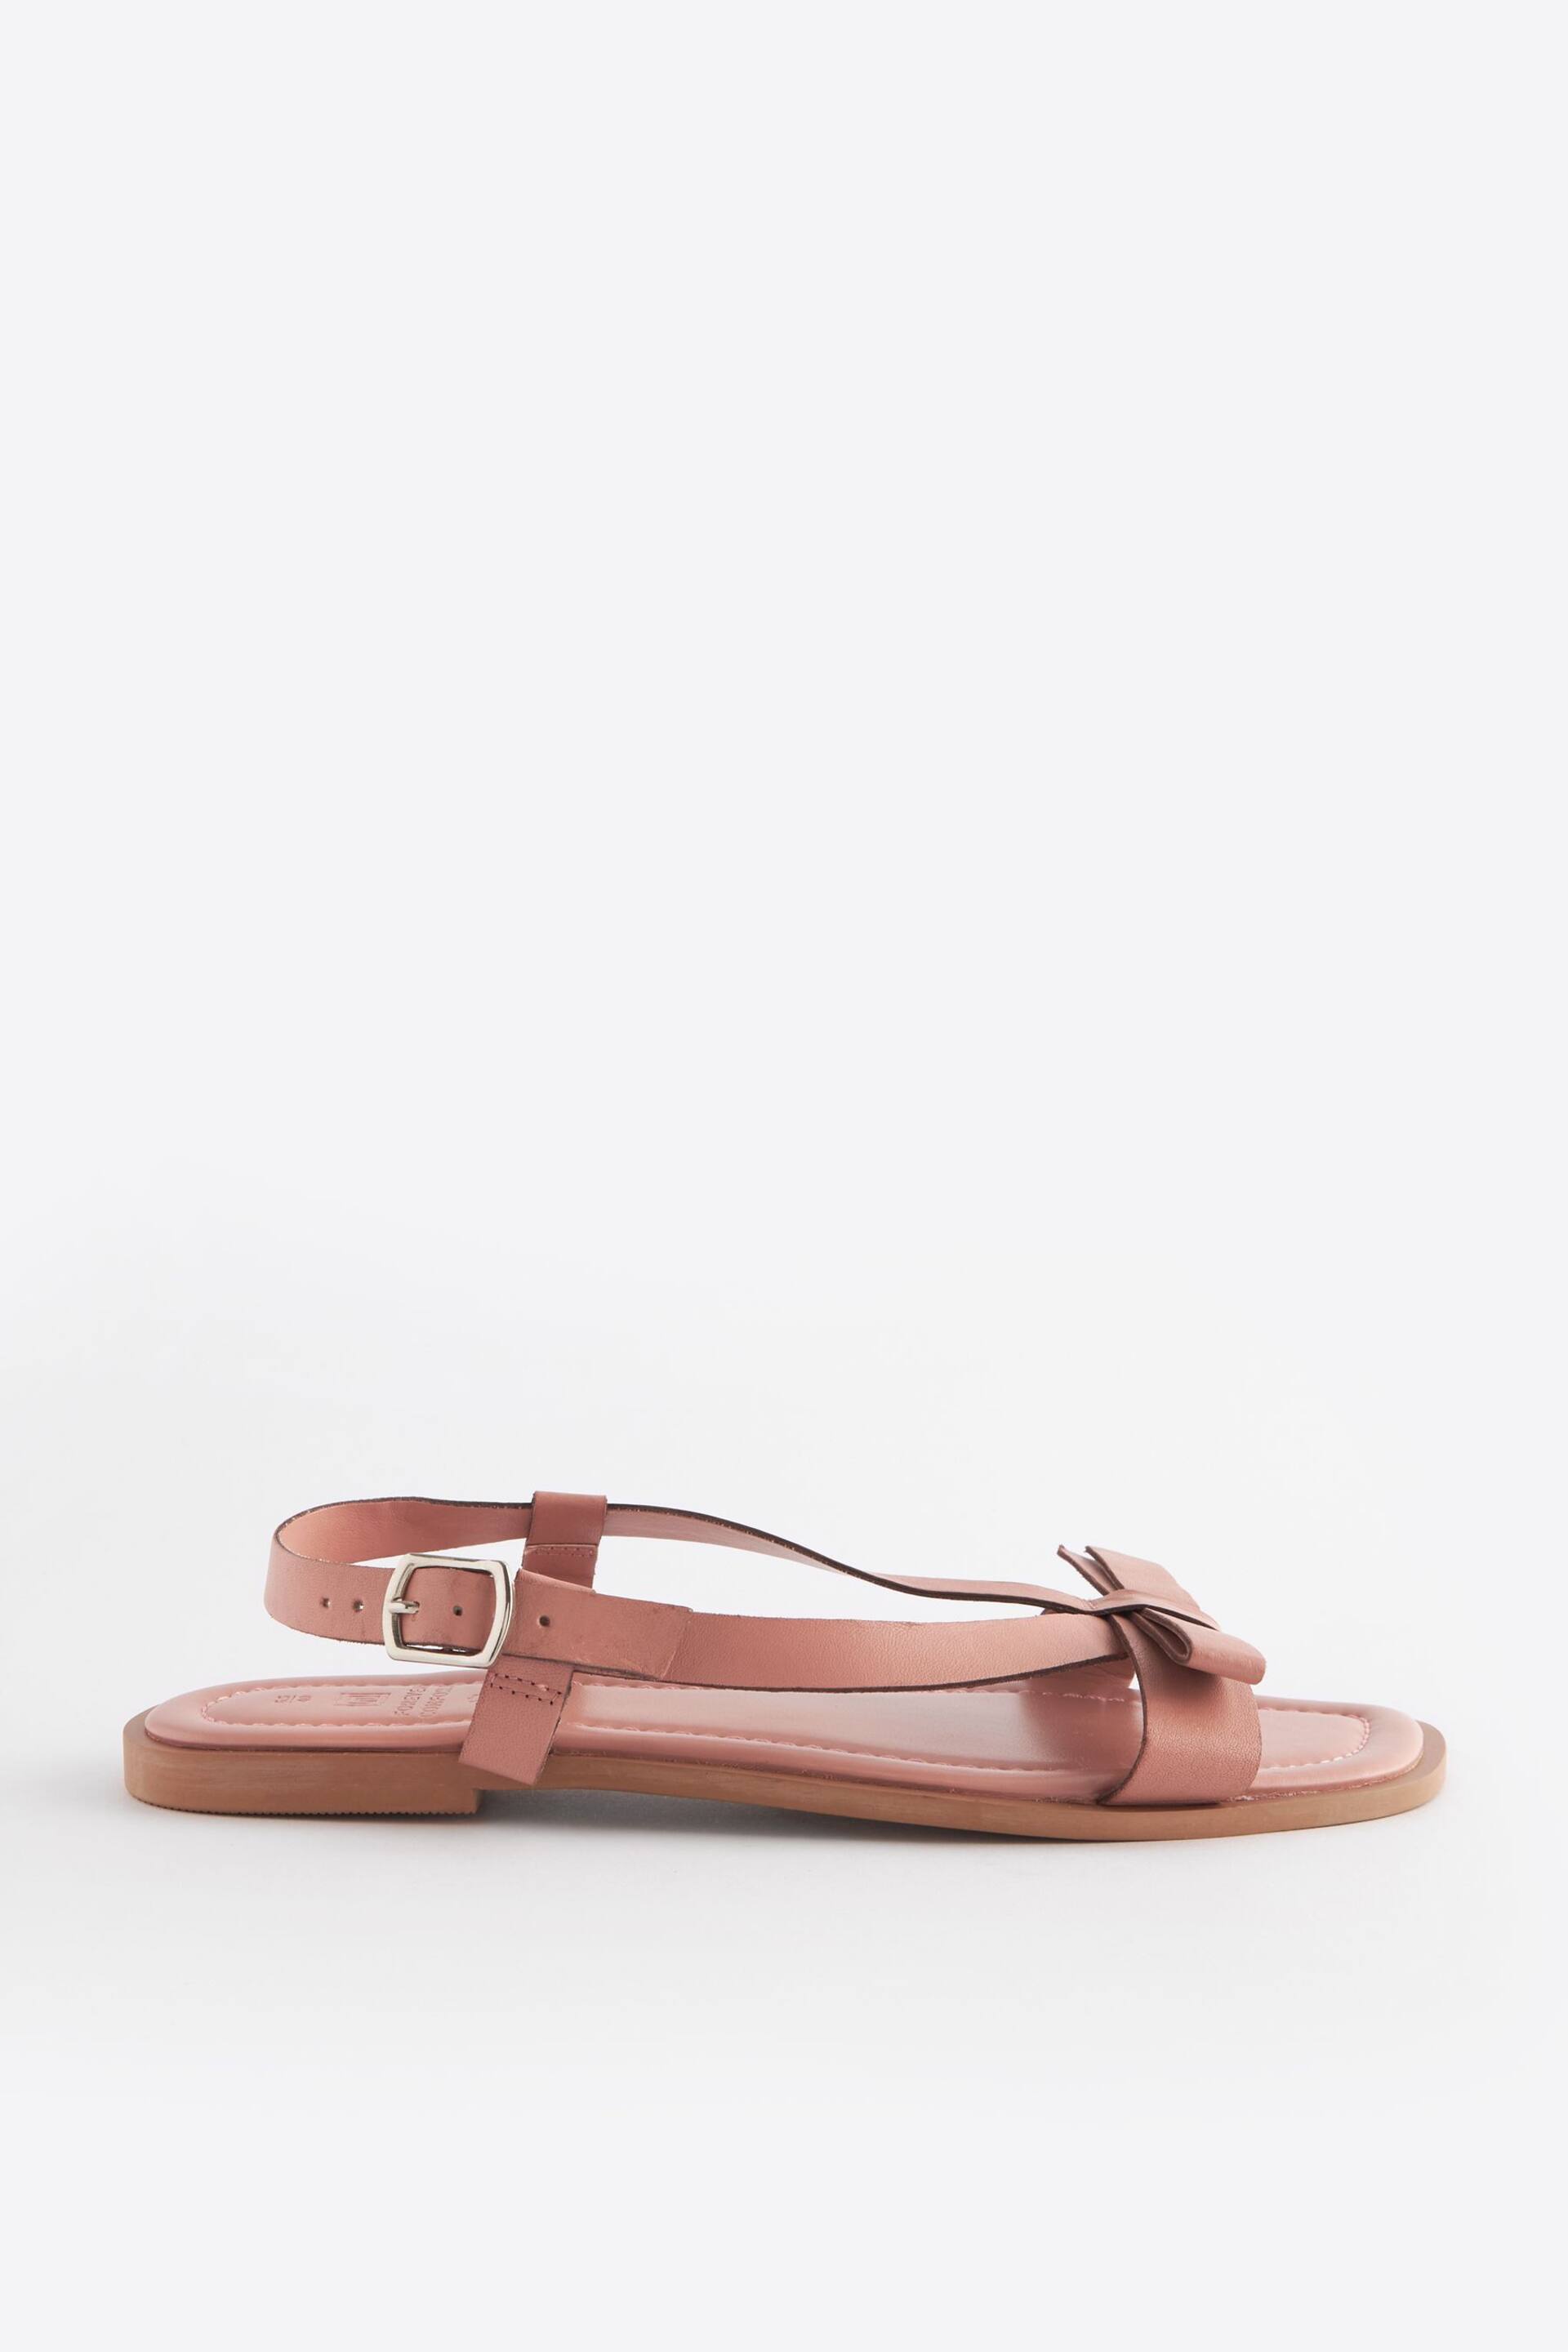 Nude Regular/Wide Fit Forever Comfort ® Leather Bow Sandals - Image 3 of 7